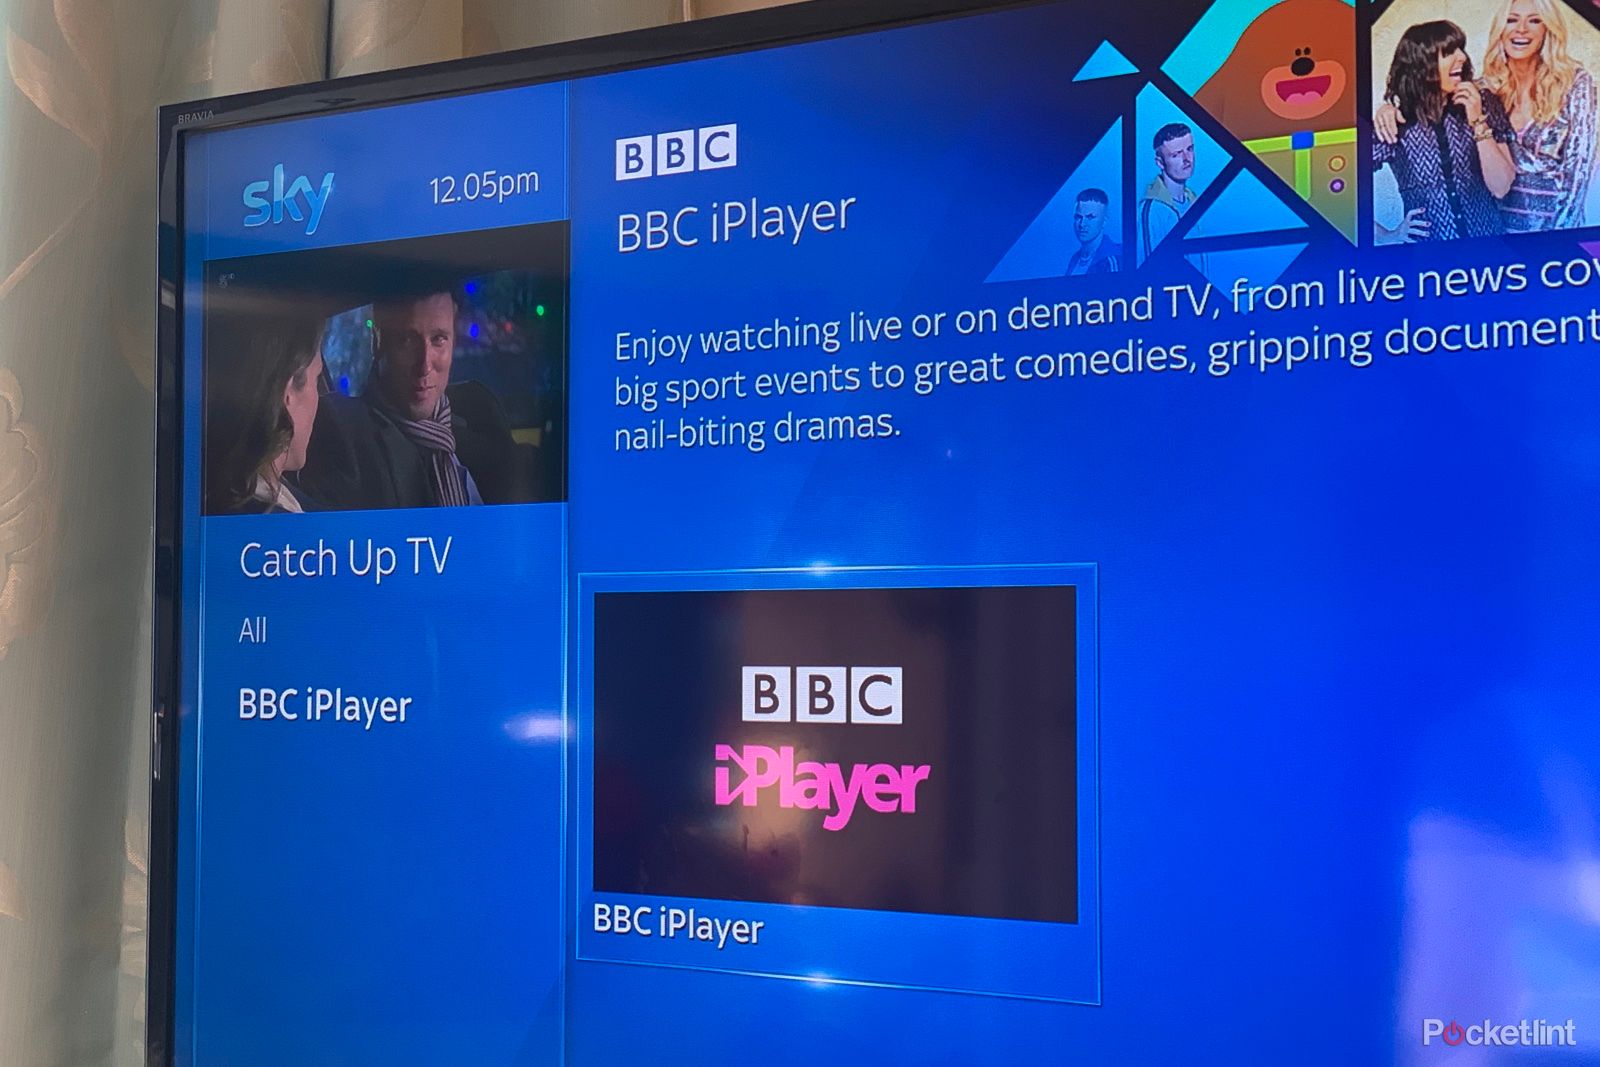 Full BBC iPlayer finally comes to Sky Q image 1